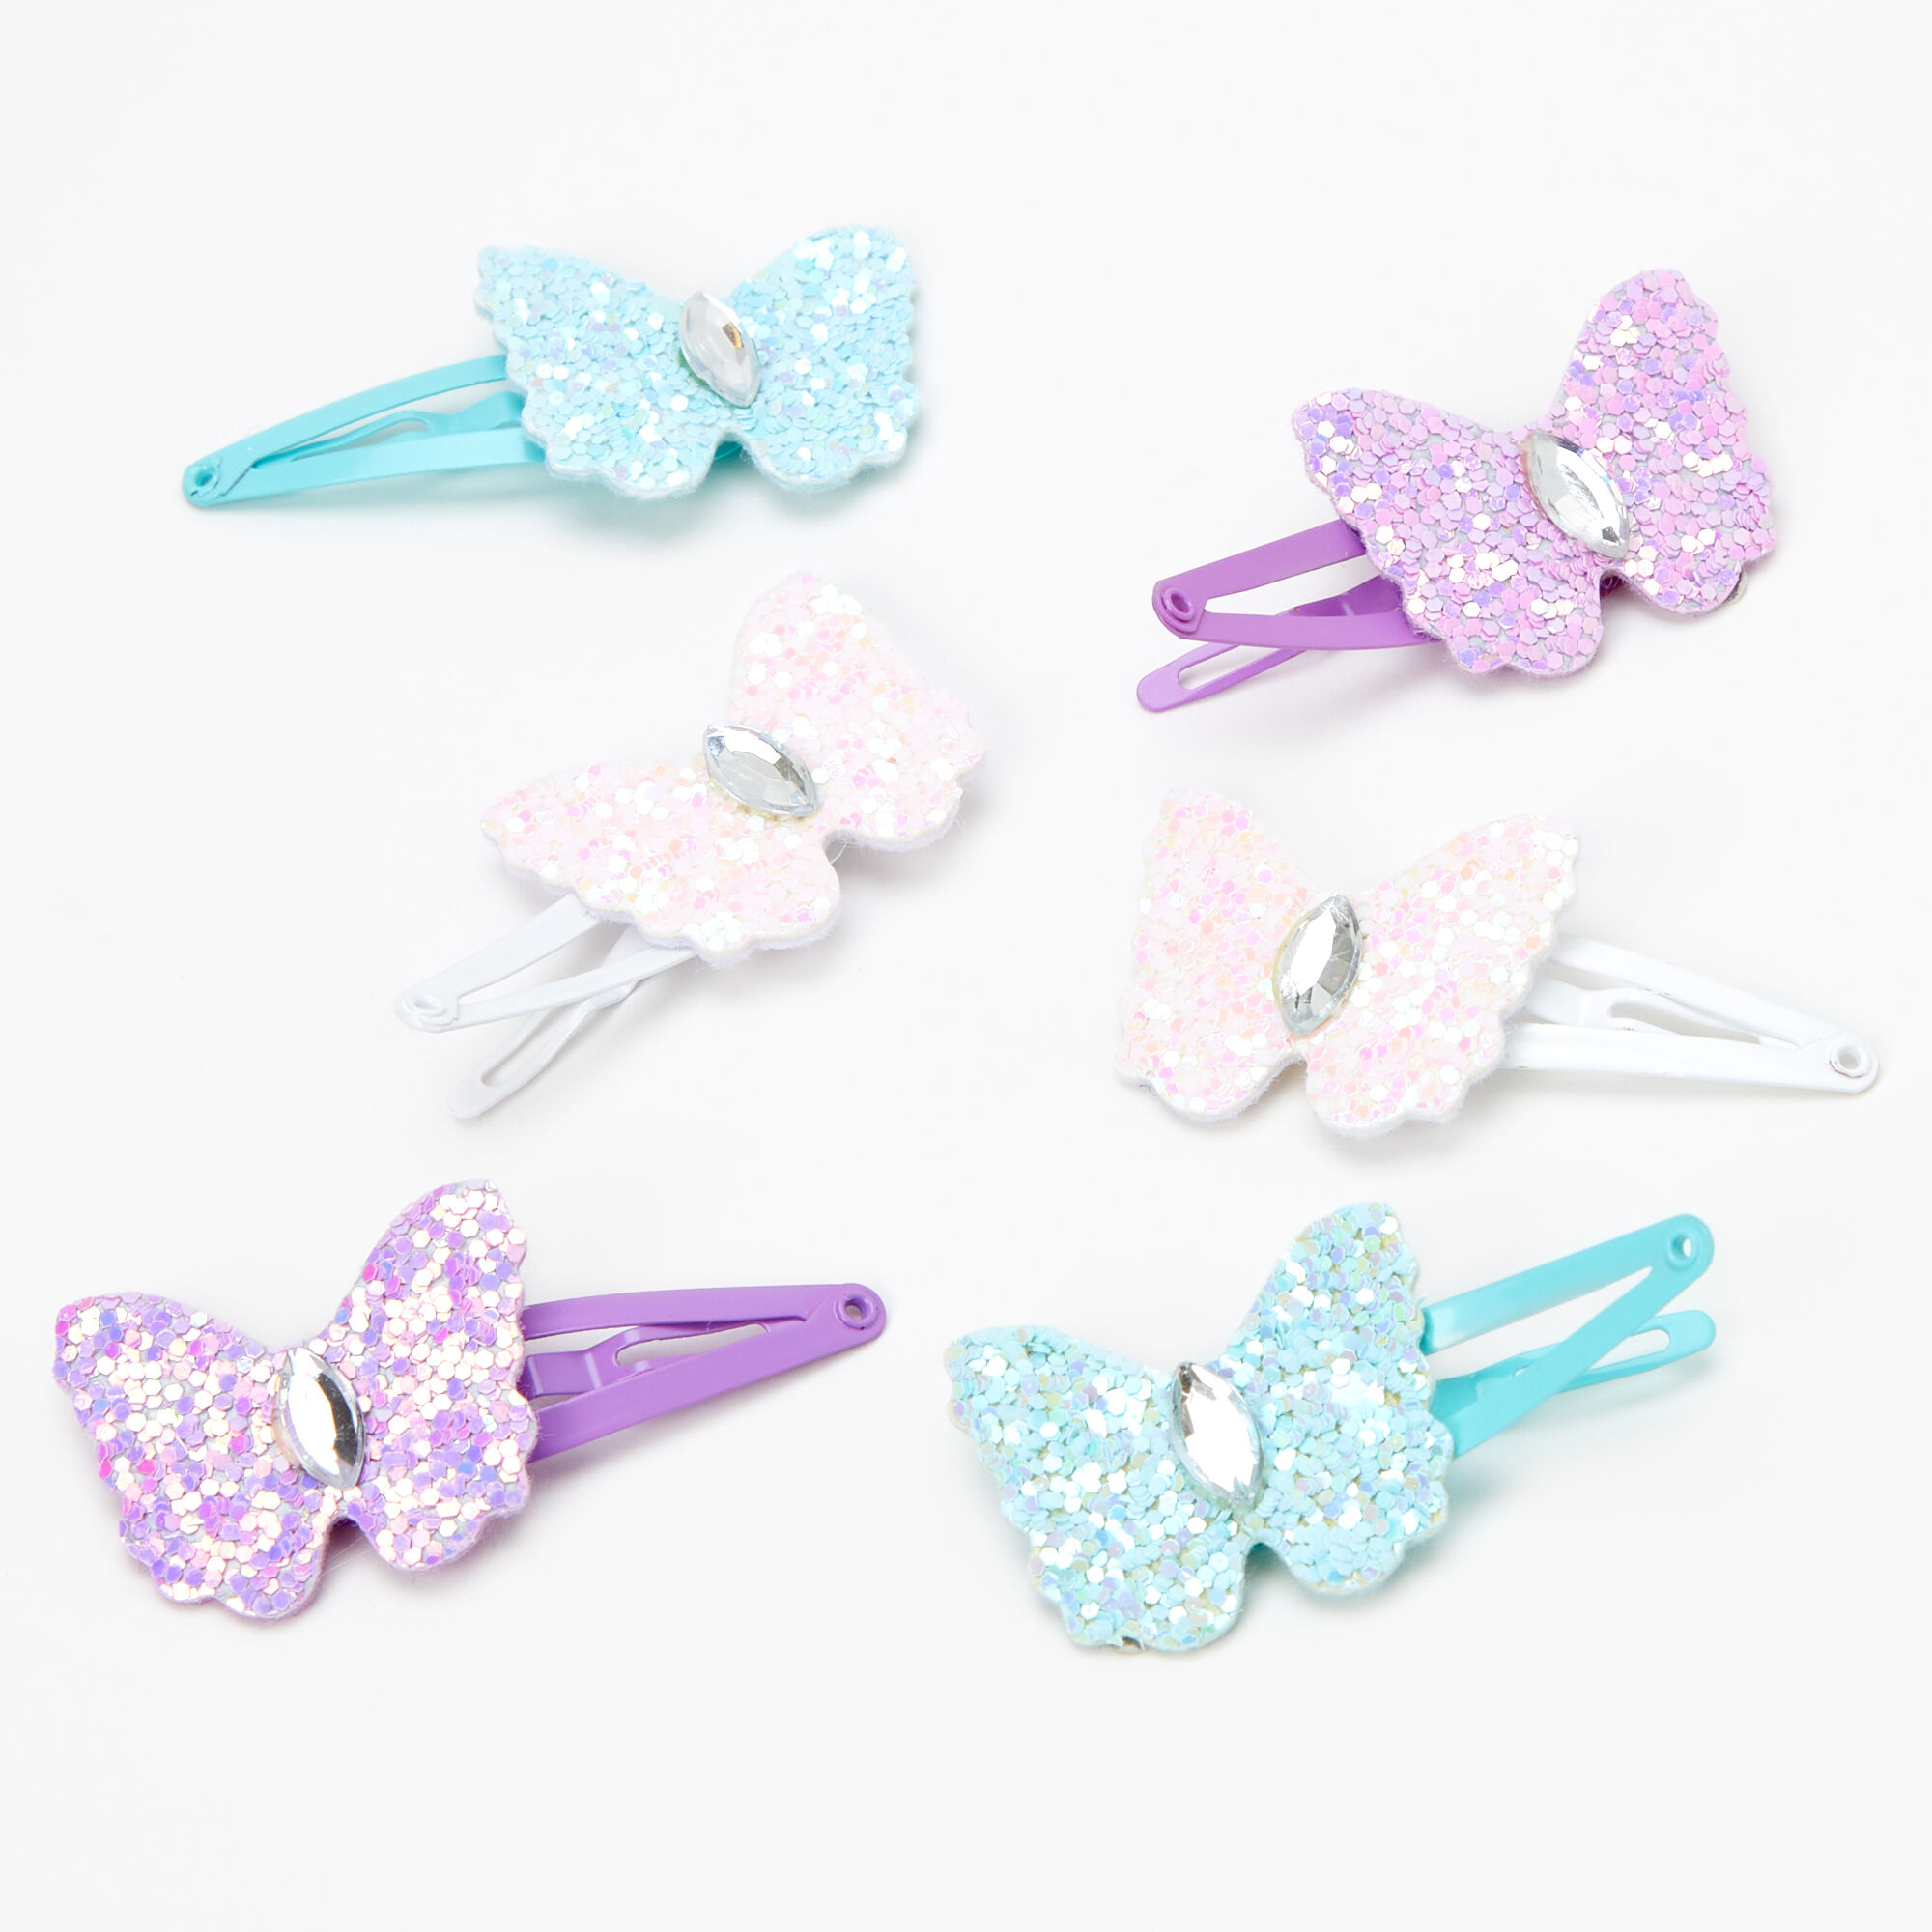 cnhairaccessories 2pcs Back to School Glitter Snap Hair Clips